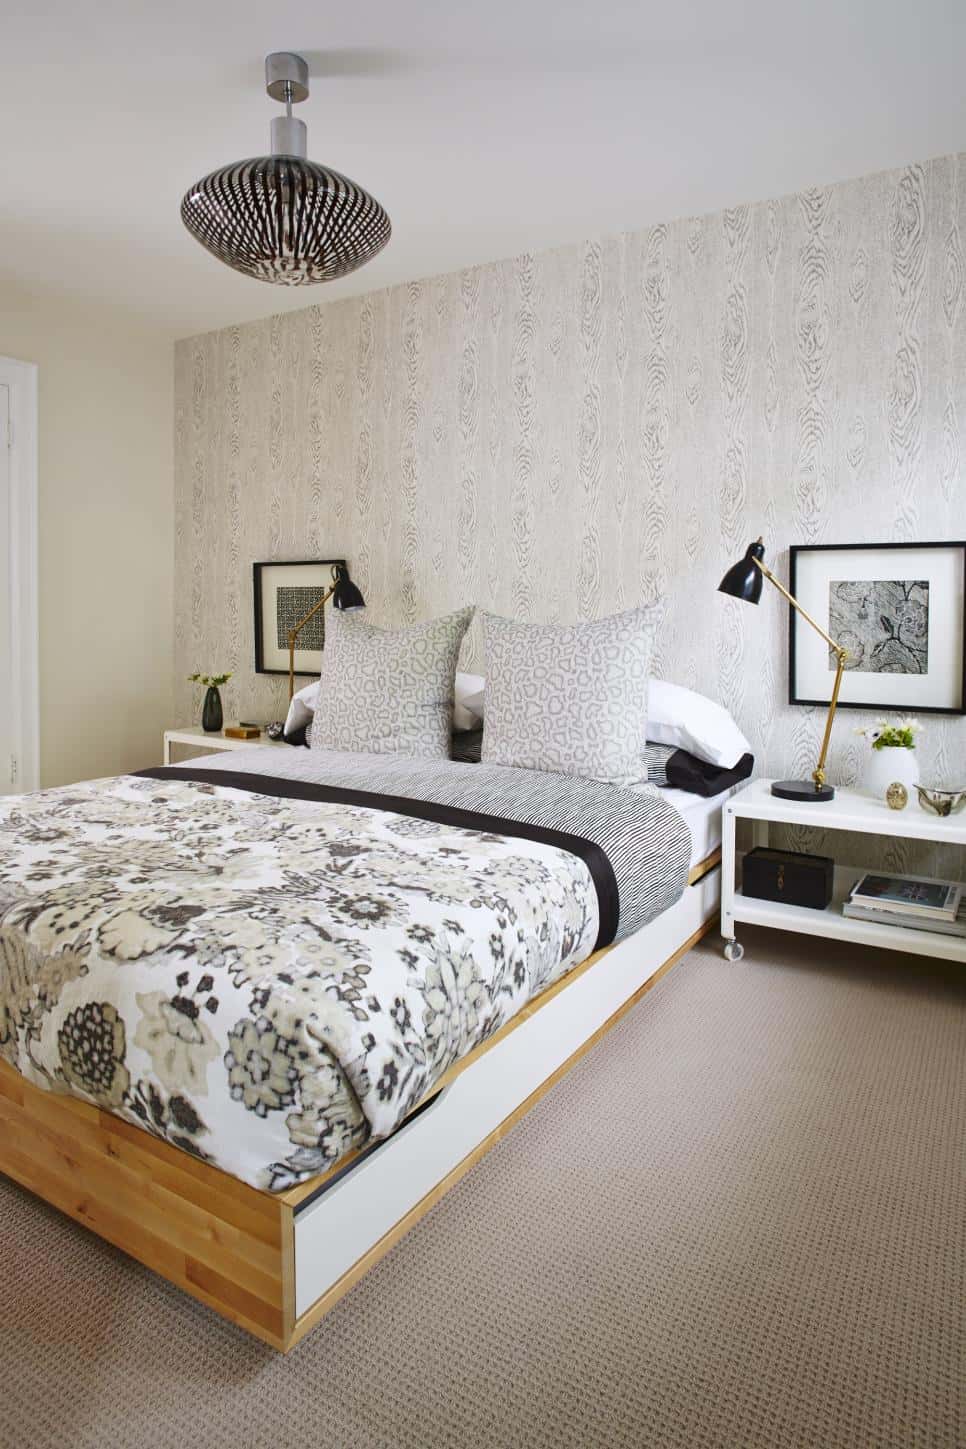 Mix of traditionalism and modernity in bedroom by Sarah Richardson